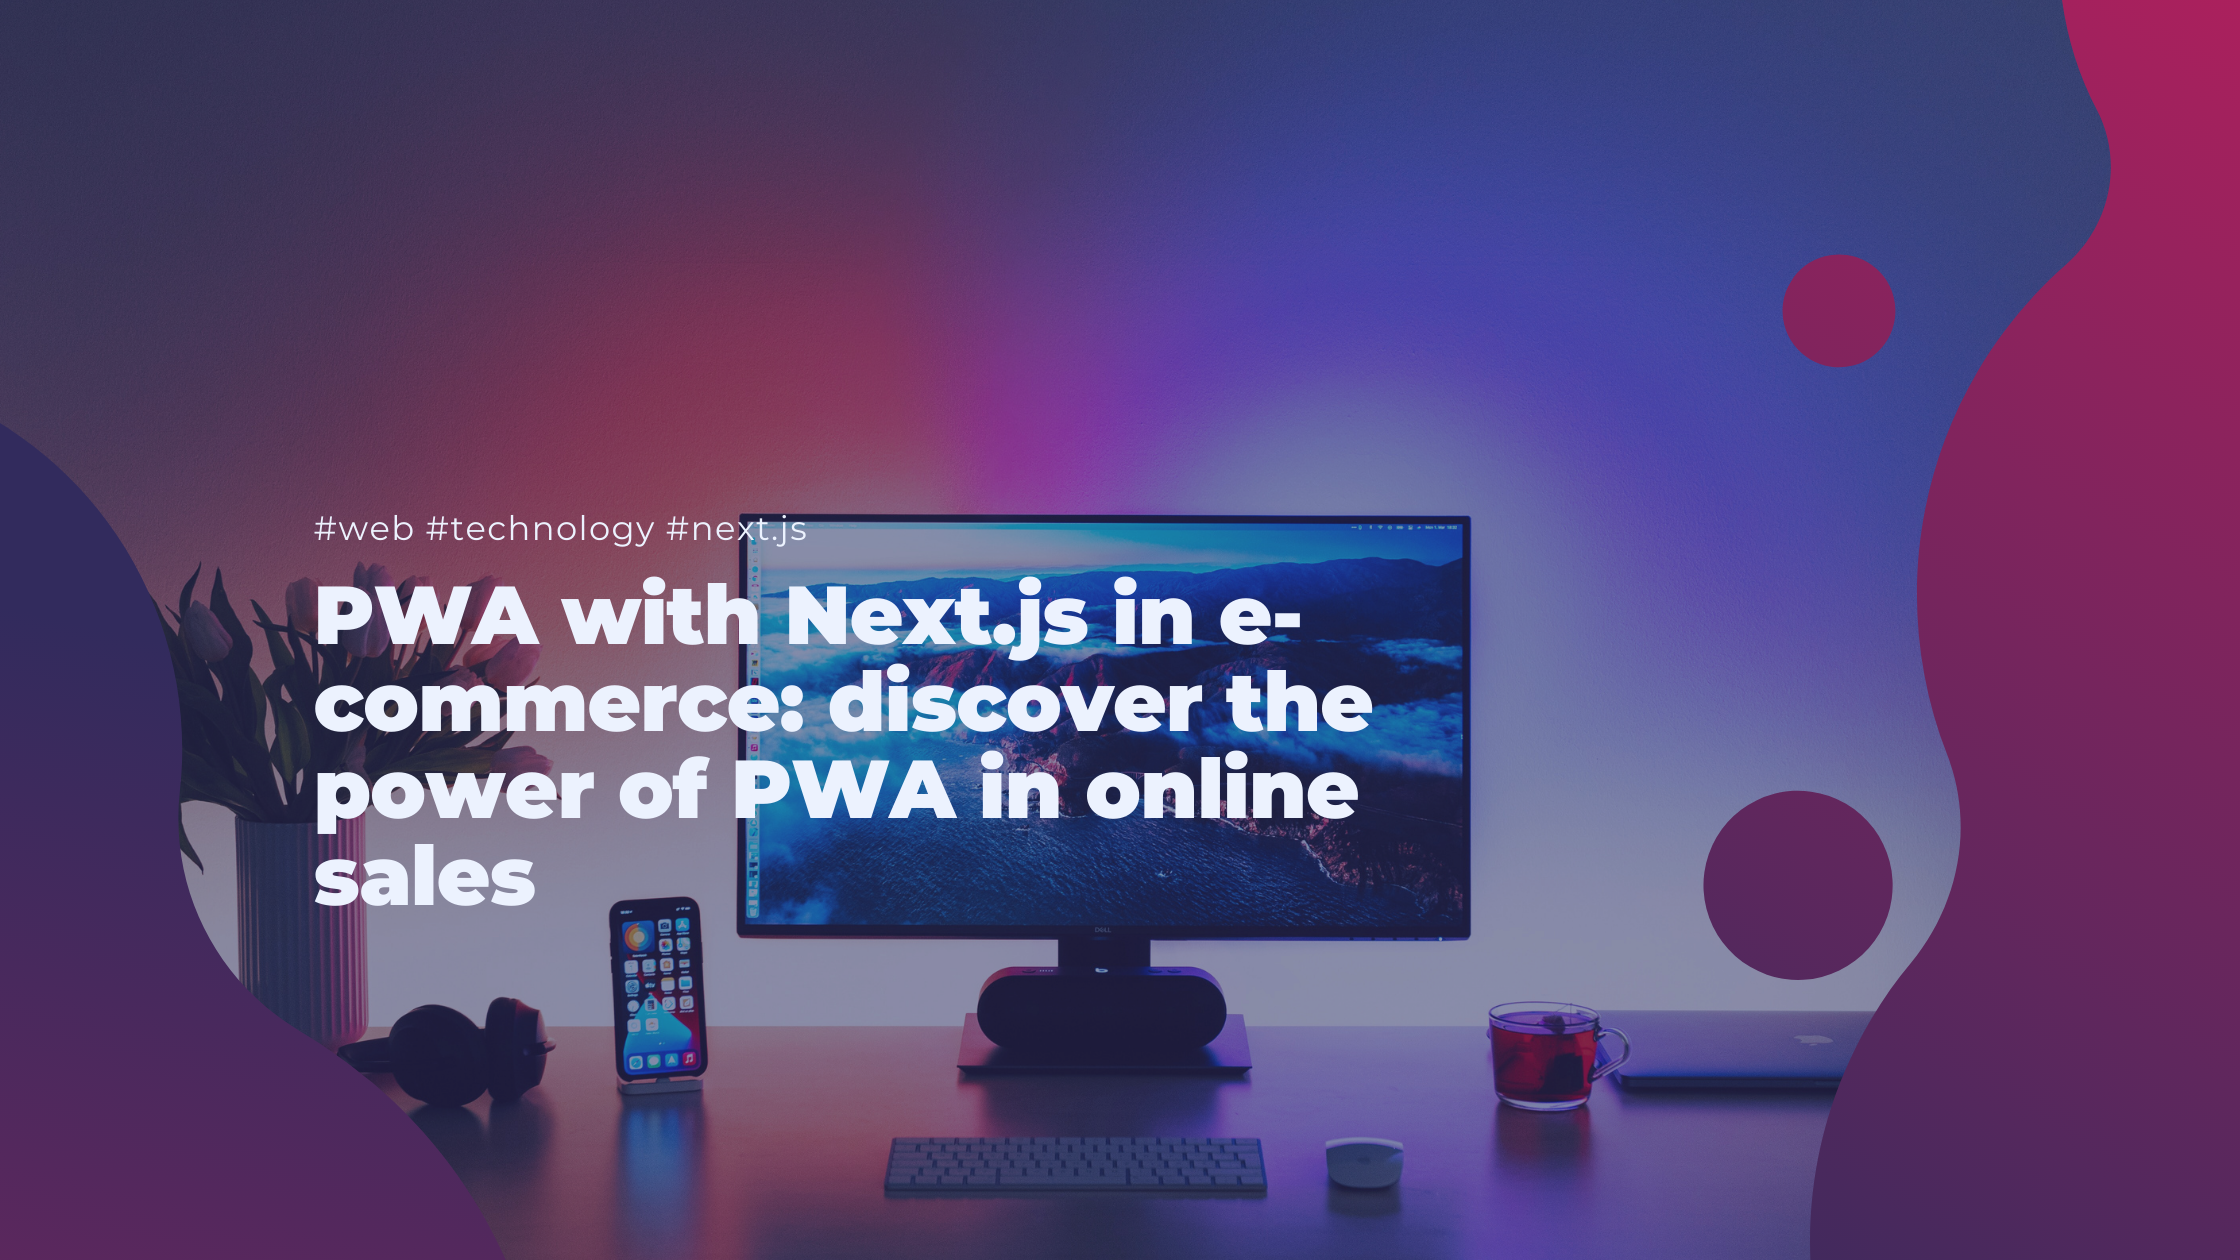 PWA with Next.js in e-commerce: discover the power of PWA in online sales